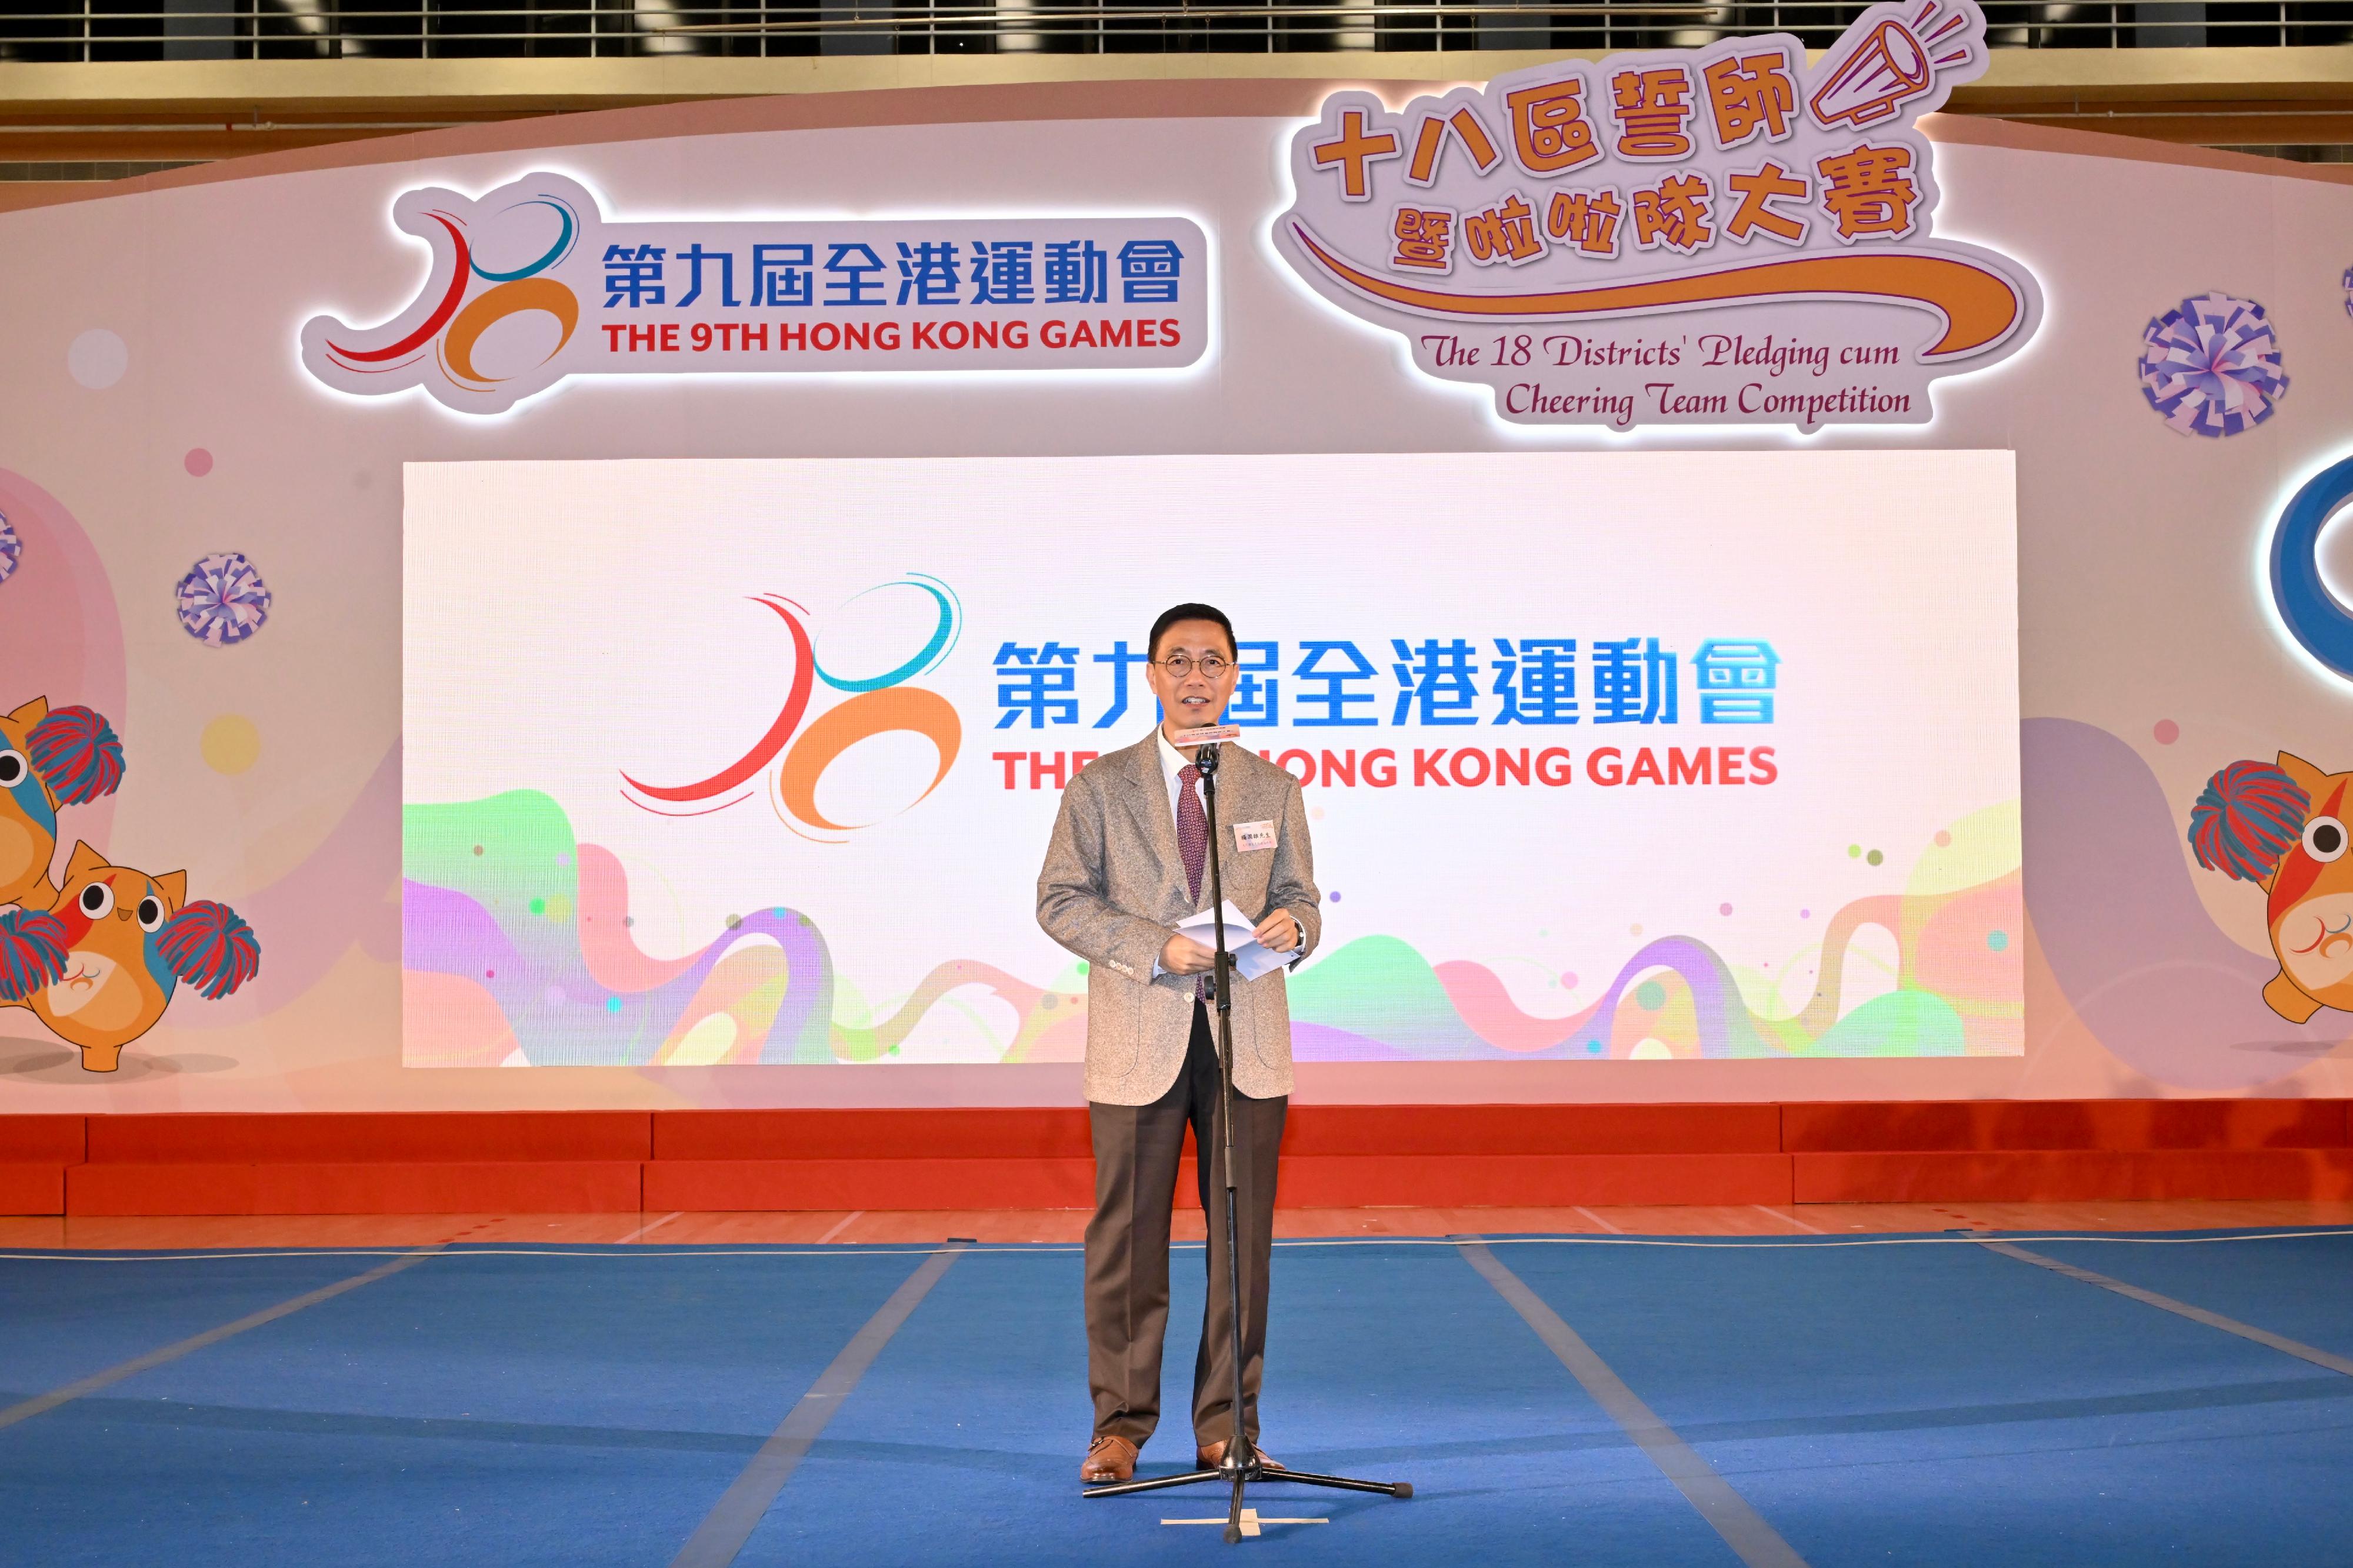 The Secretary for Culture, Sports and Tourism, Mr Kevin Yeung, speaks at the 18 Districts' Pledging cum Cheering Team Competition of the 9th Hong Kong Games held at Sun Yat Sen Memorial Park Sports Centre today (February 25).